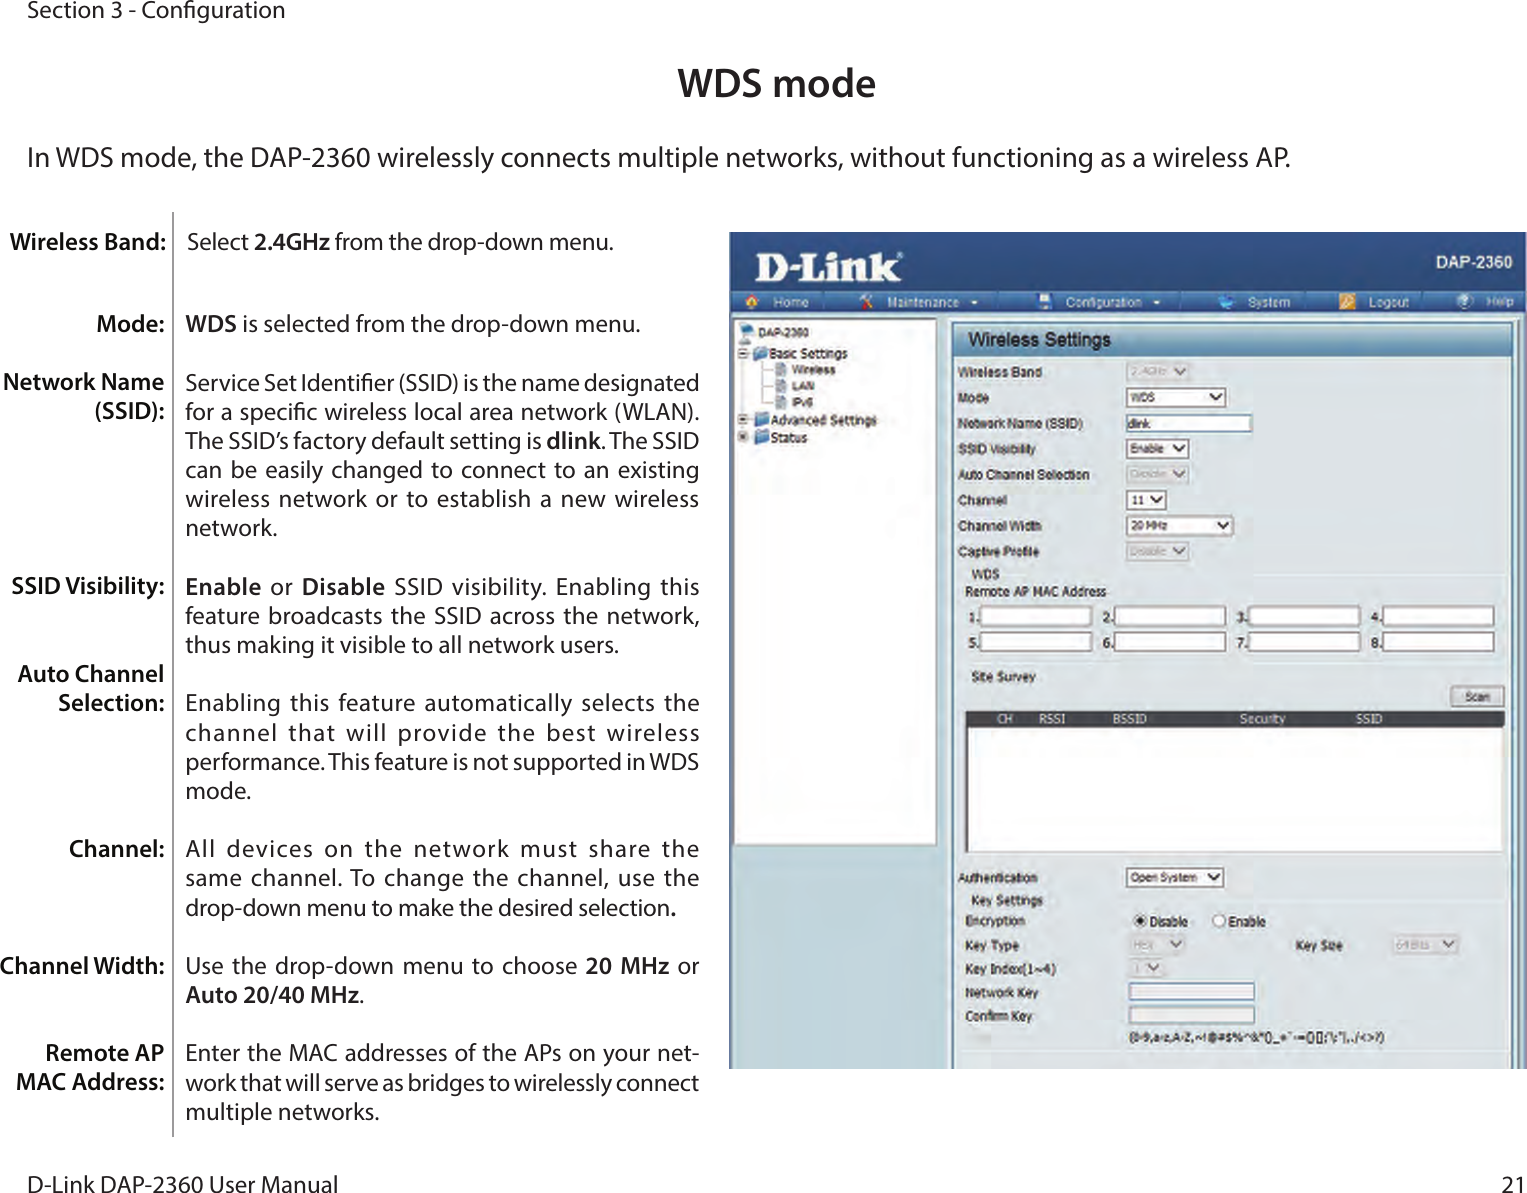 21D-Link DAP-2360 User ManualSection 3 - CongurationWDS modeIn WDS mode, the DAP-2360 wirelessly connects multiple networks, without functioning as a wireless AP.WDS is selected from the drop-down menu.Service Set Identier (SSID) is the name designated for a specic wireless local area network (WLAN). The SSID’s factory default setting is dlink. The SSID can be easily changed to  connect to  an existing wireless network or  to establish a  new wireless network.Enable  or  Disable SSID visibility. Enabling  this feature  broadcasts the SSID  across the network, thus making it visible to all network users.Enabling this feature  automatically selects  the channel that  will  provide the  best  wireless performance. This feature is not supported in WDS mode.All  devices  on  the  network  must  share  the same channel. To change the channel, use  the drop-down menu to make the desired selection.Use the drop-down menu to choose 20 MHz or Auto 20/40 MHz.Enter the MAC addresses of the APs on your net-work that will serve as bridges to wirelessly connect multiple networks.Mode:Network Name (SSID):SSID Visibility:Auto Channel Selection:Channel:Channel Width:Remote AP MAC Address:Wireless Band: Select 2.4GHz from the drop-down menu. 